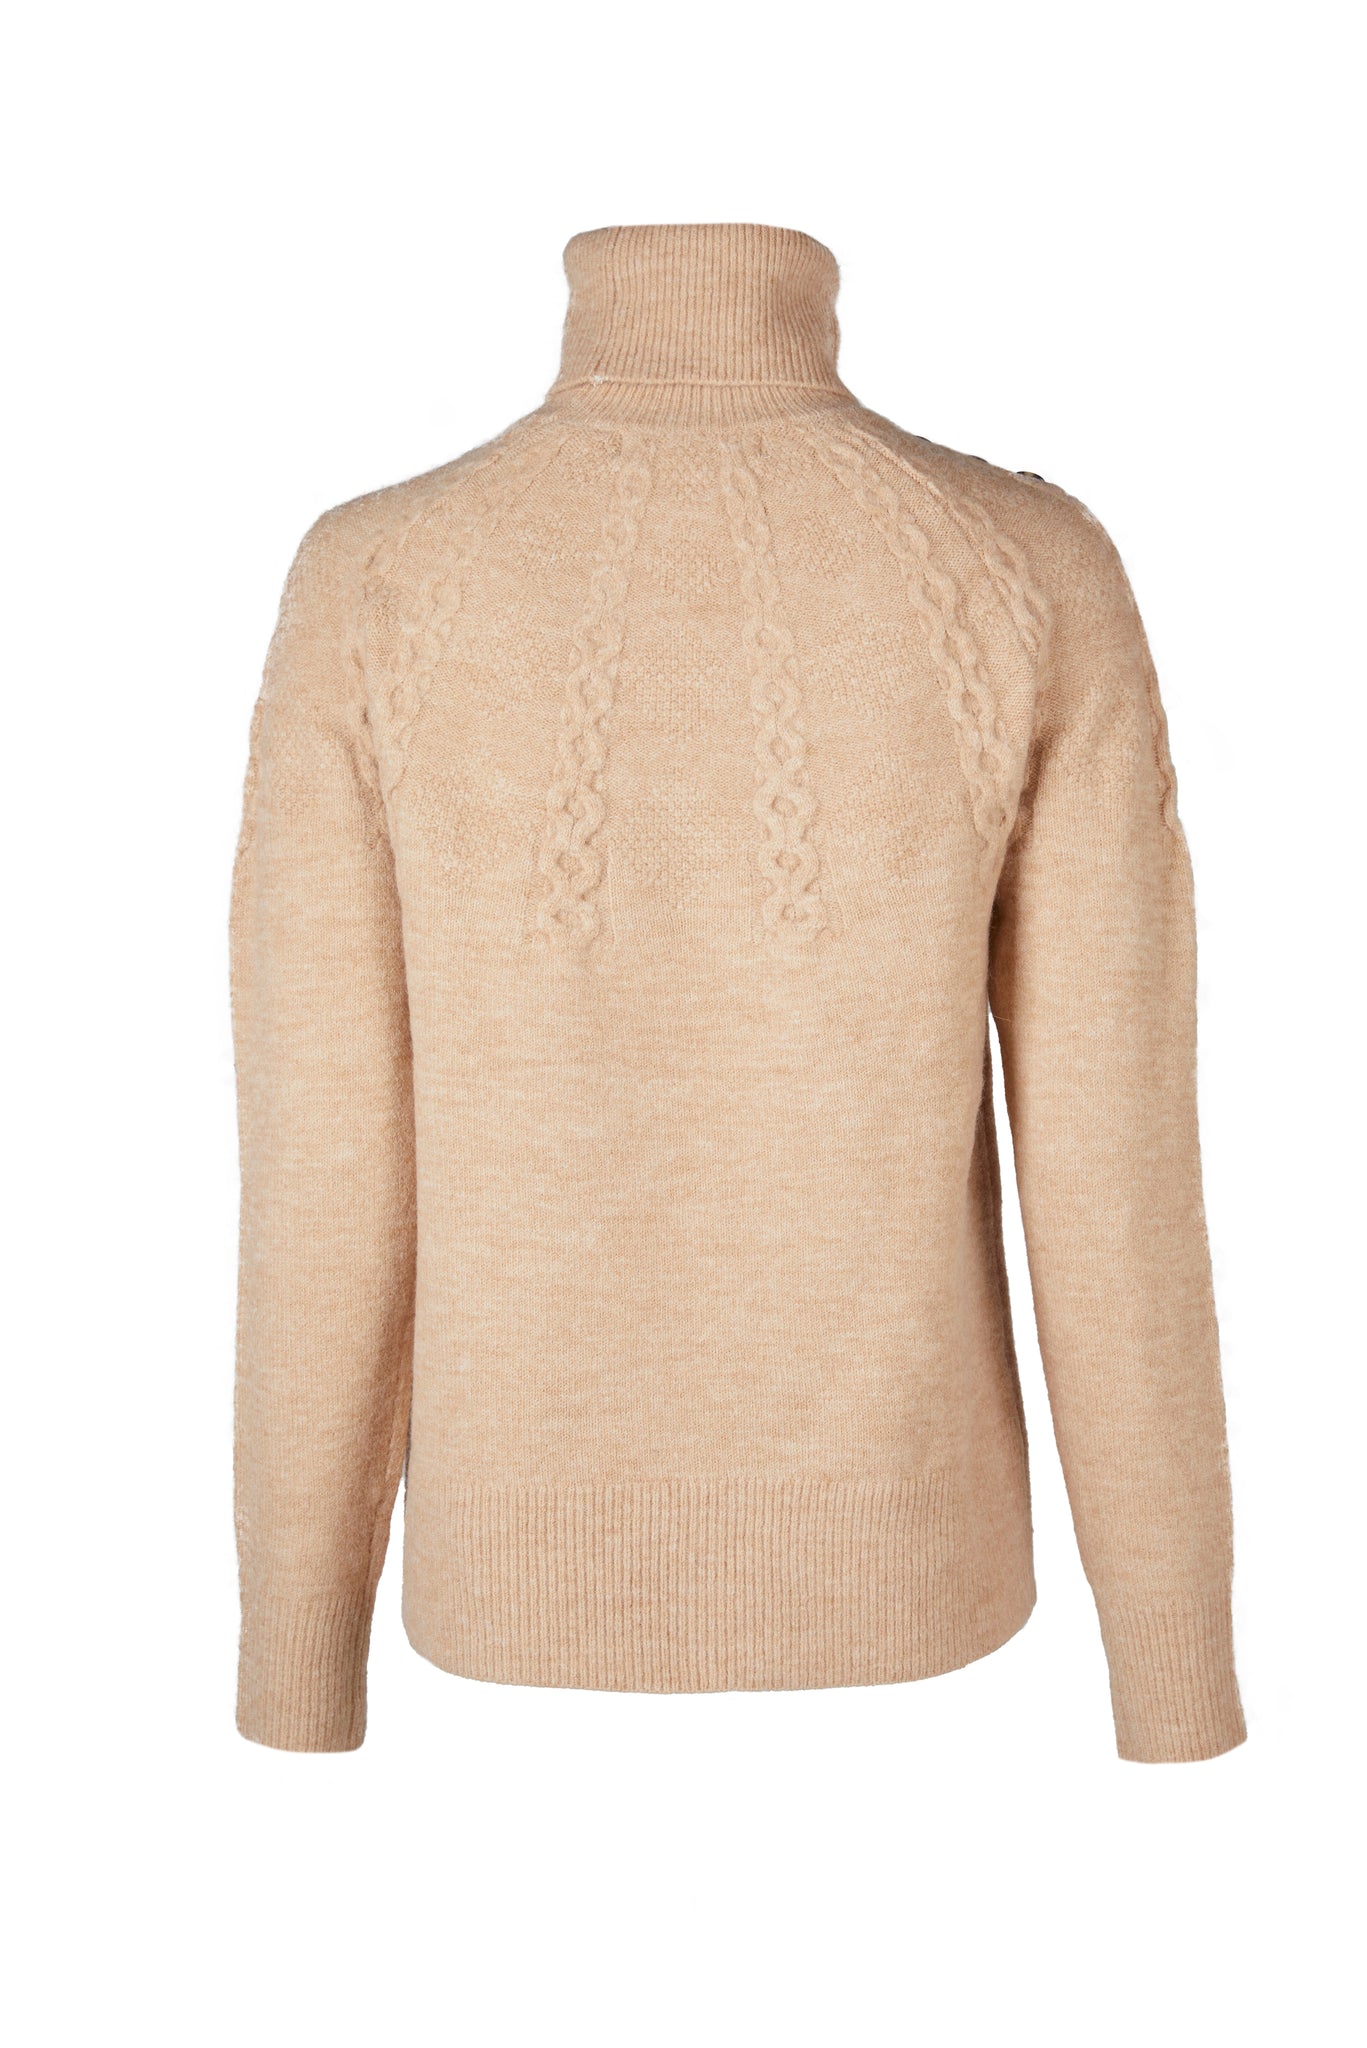 back of chunky knit roll neck jumper in camel with textured knit detailing and horn buttons across both shoulders